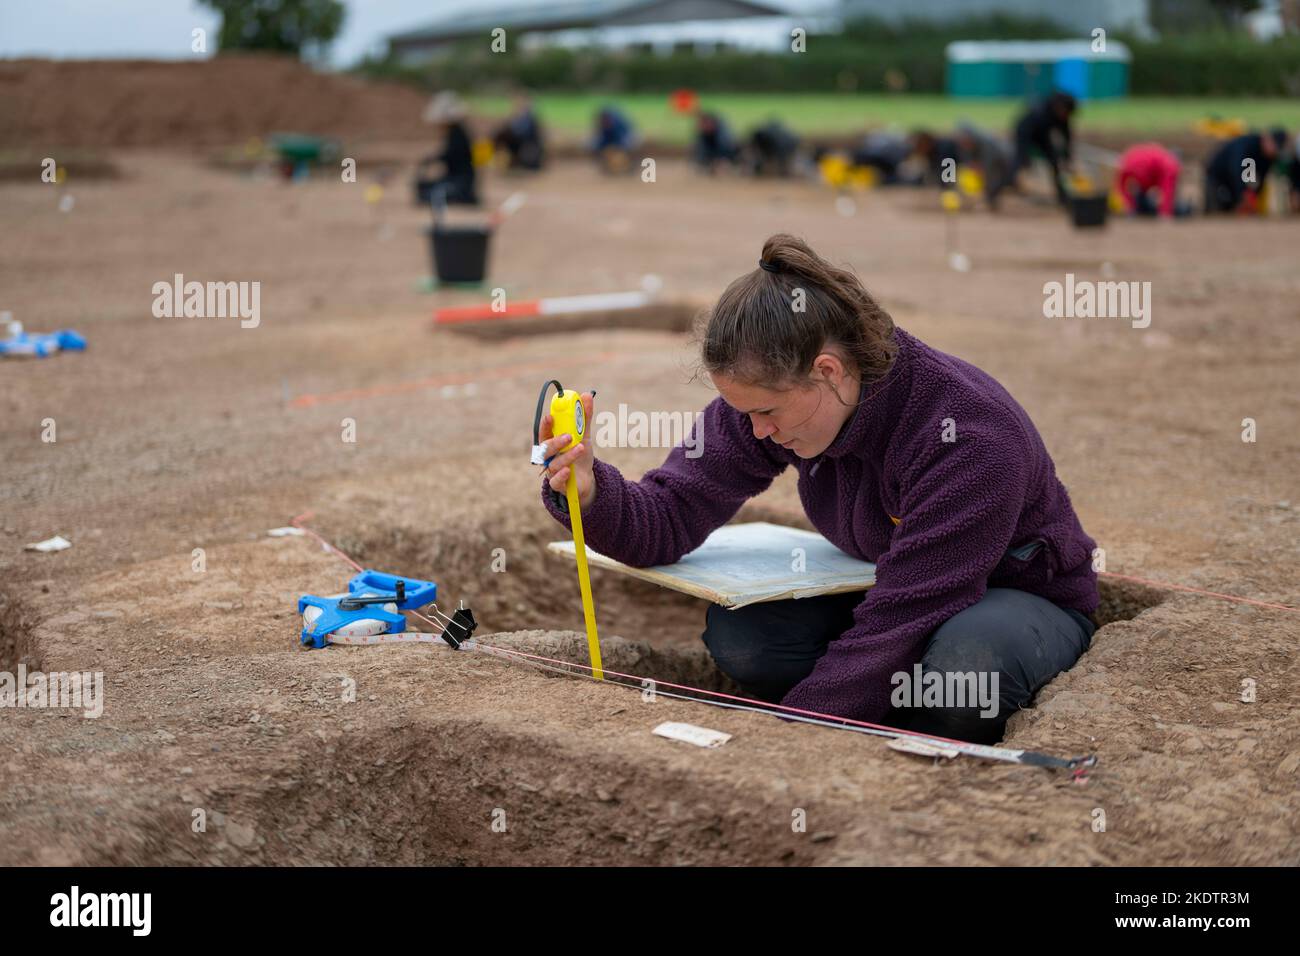 Picture By Jim Wileman - Ipplepen Archeaology Site, University of Exeter, 2019. Stock Photo